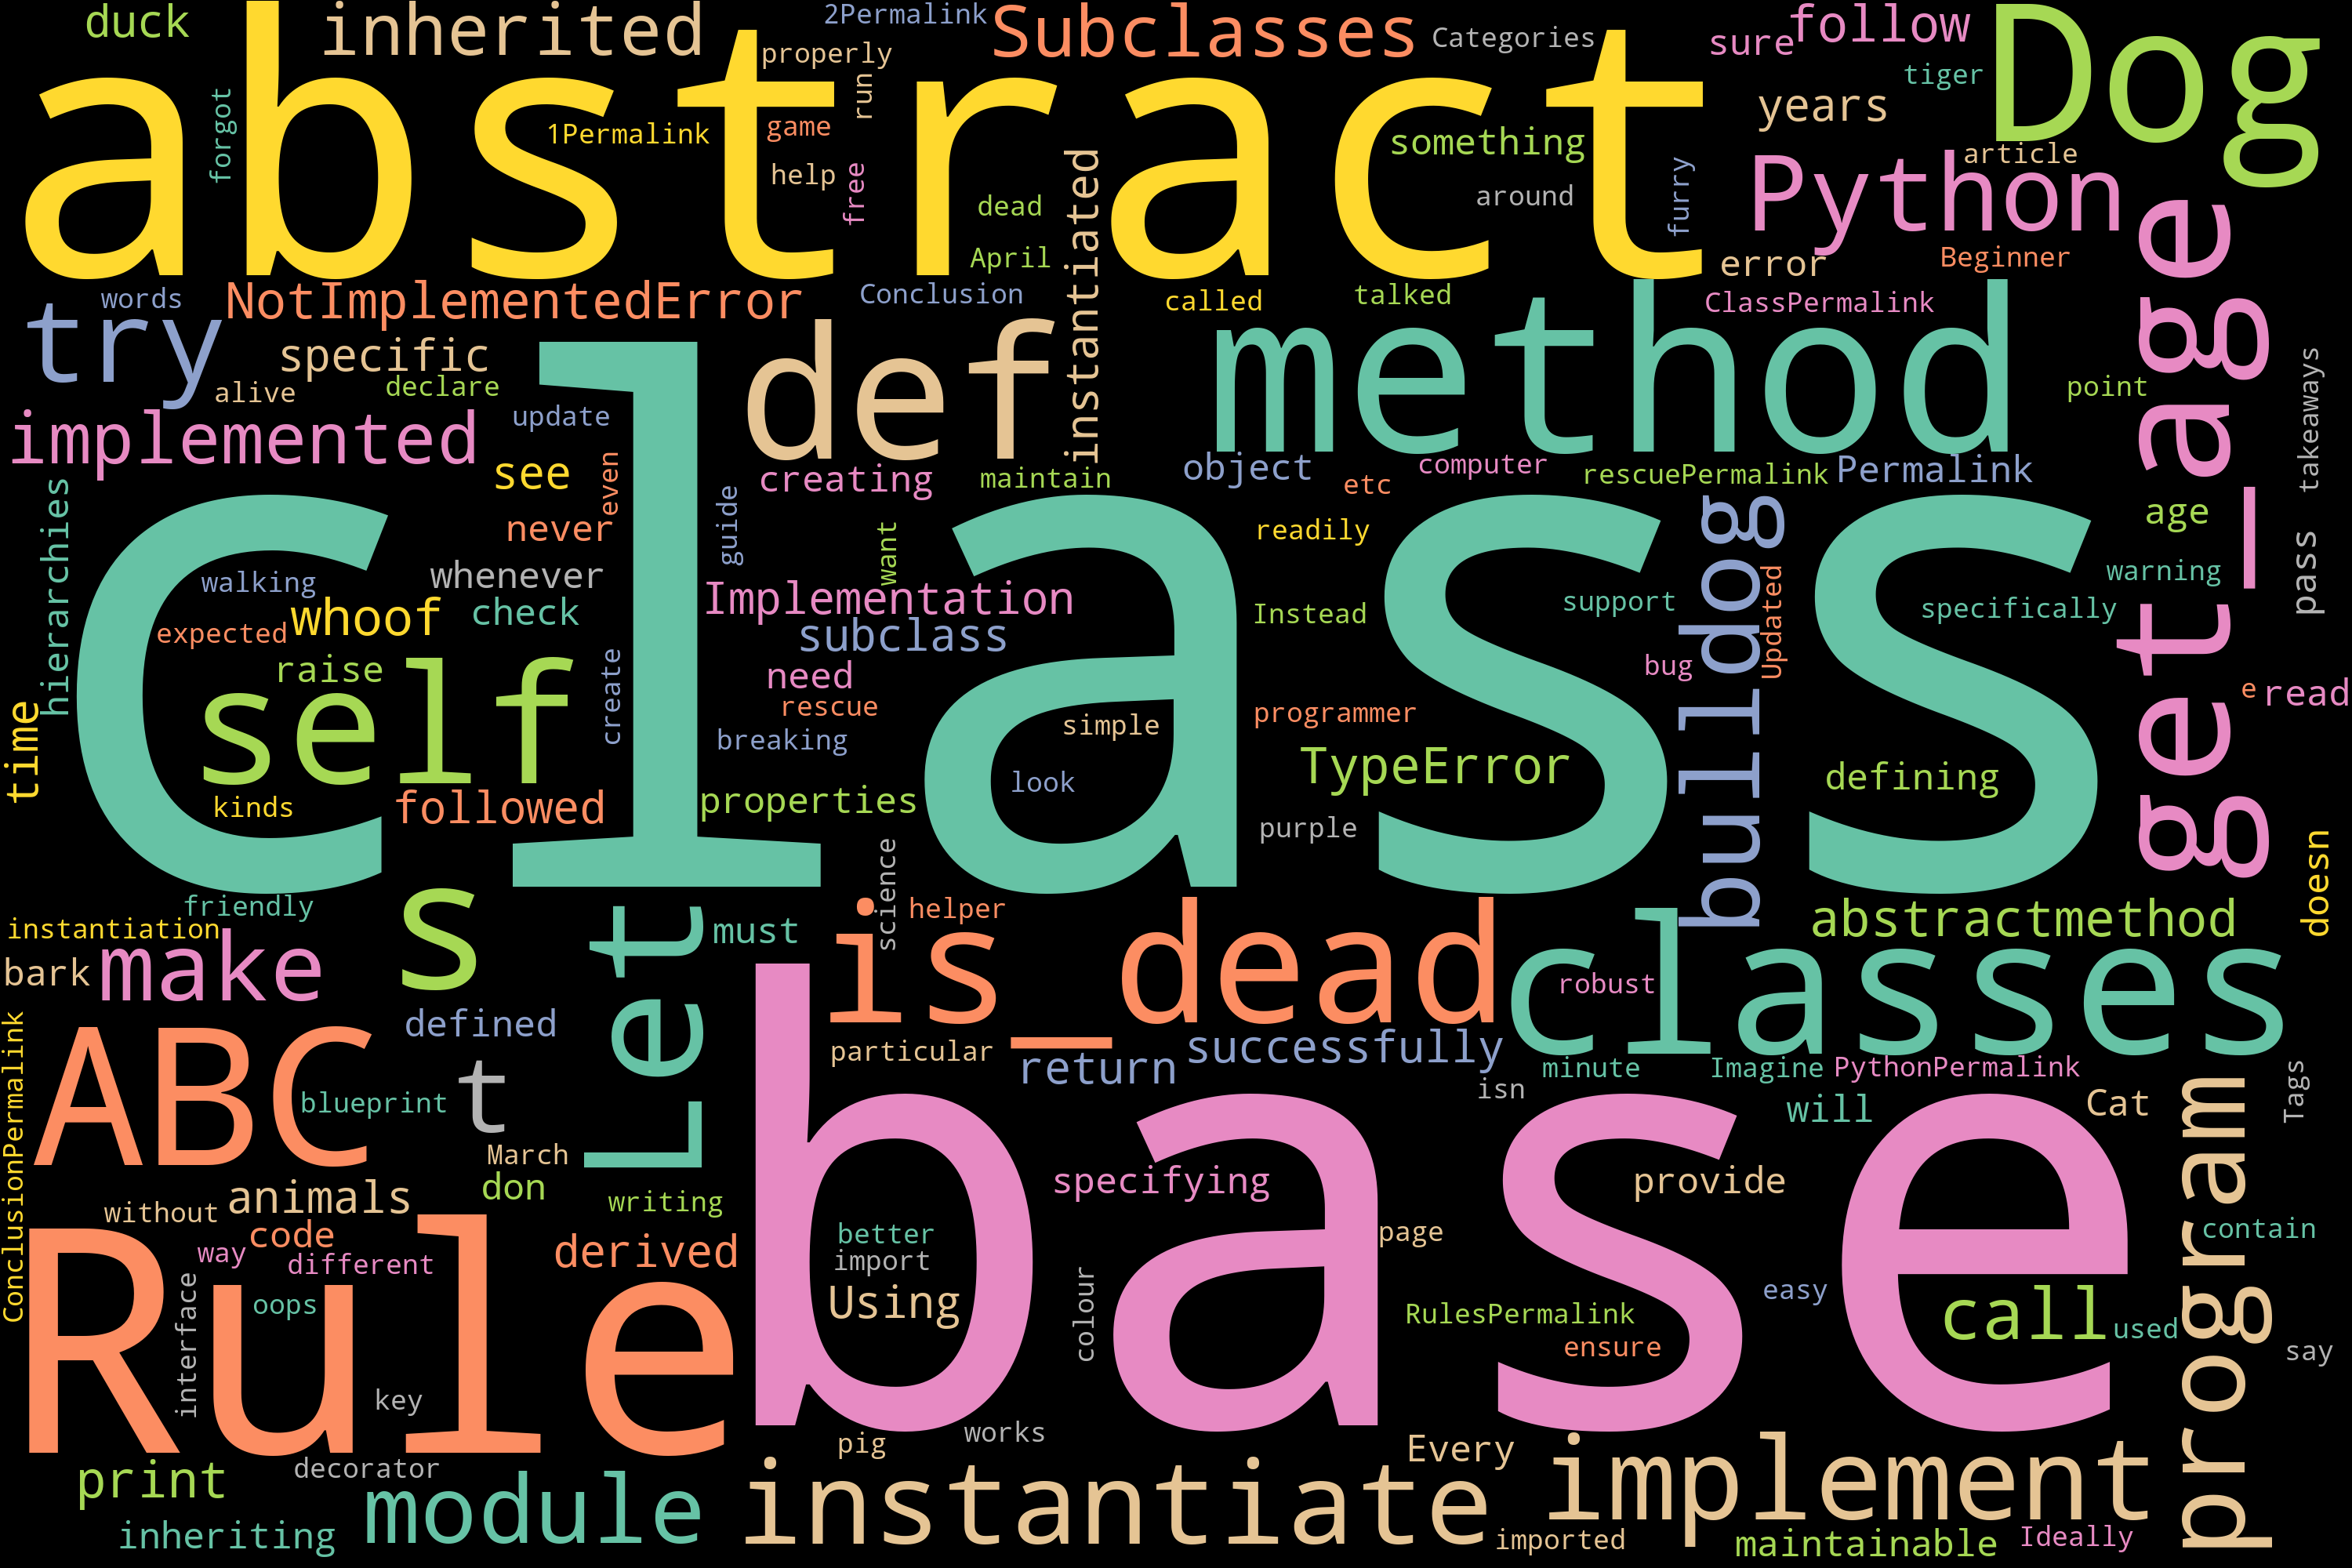 Abstract Base Classes in Python